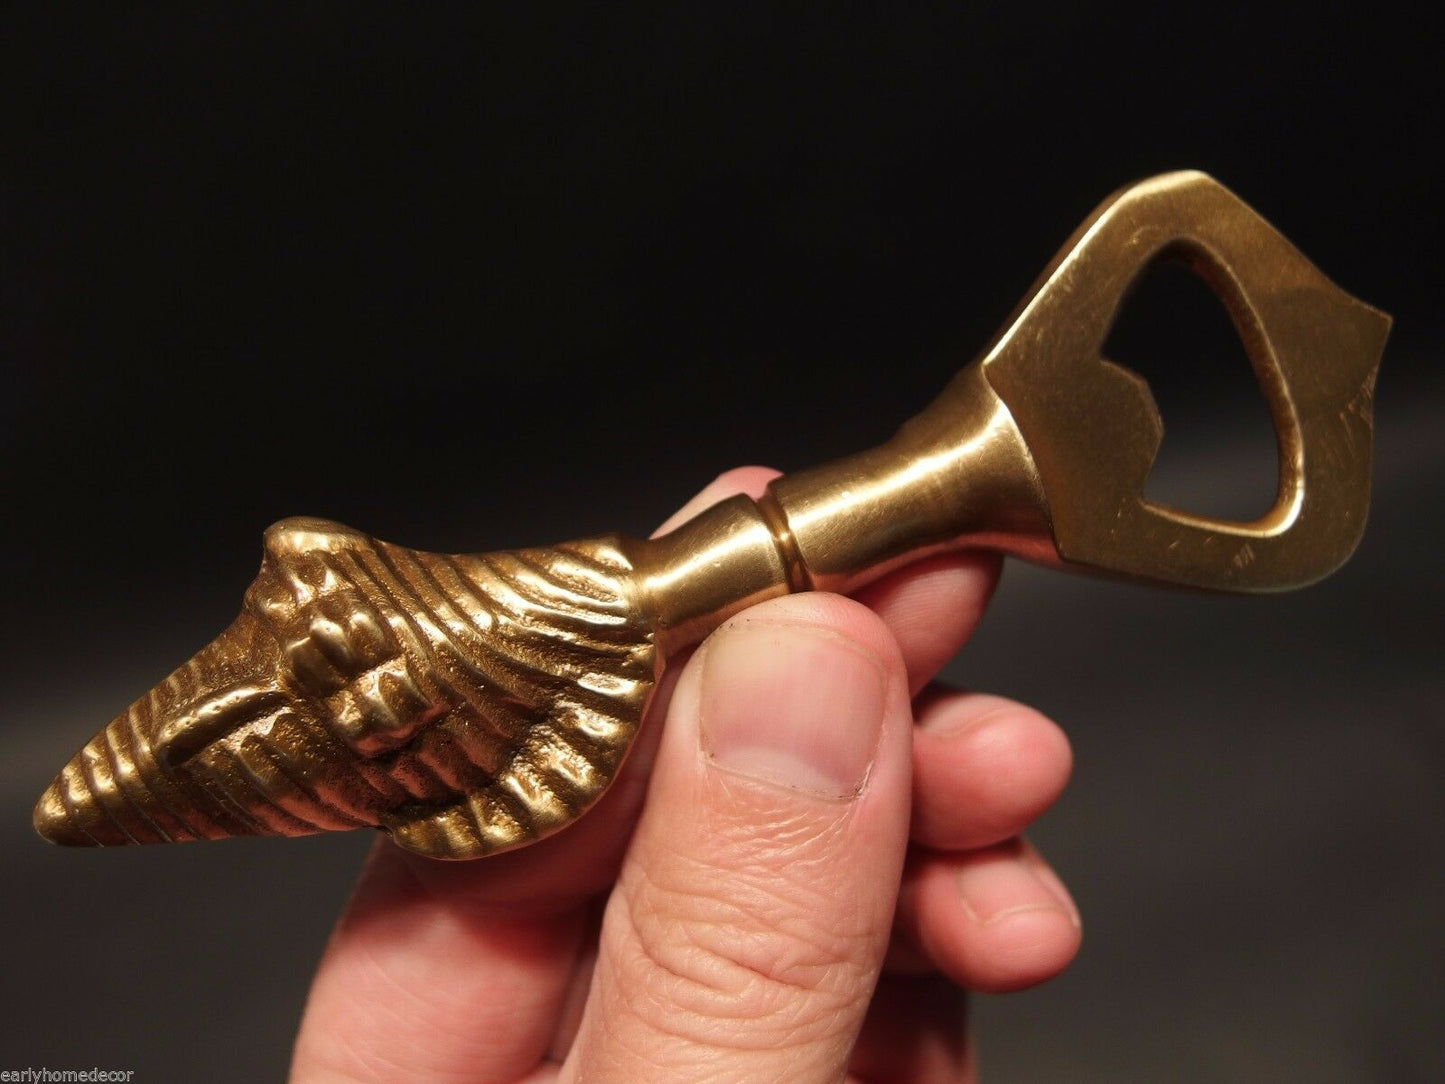 Vintage Antique Style Brass Fishing Conch Shell Beer Soda Bottle Cap Opener - Early Home Decor